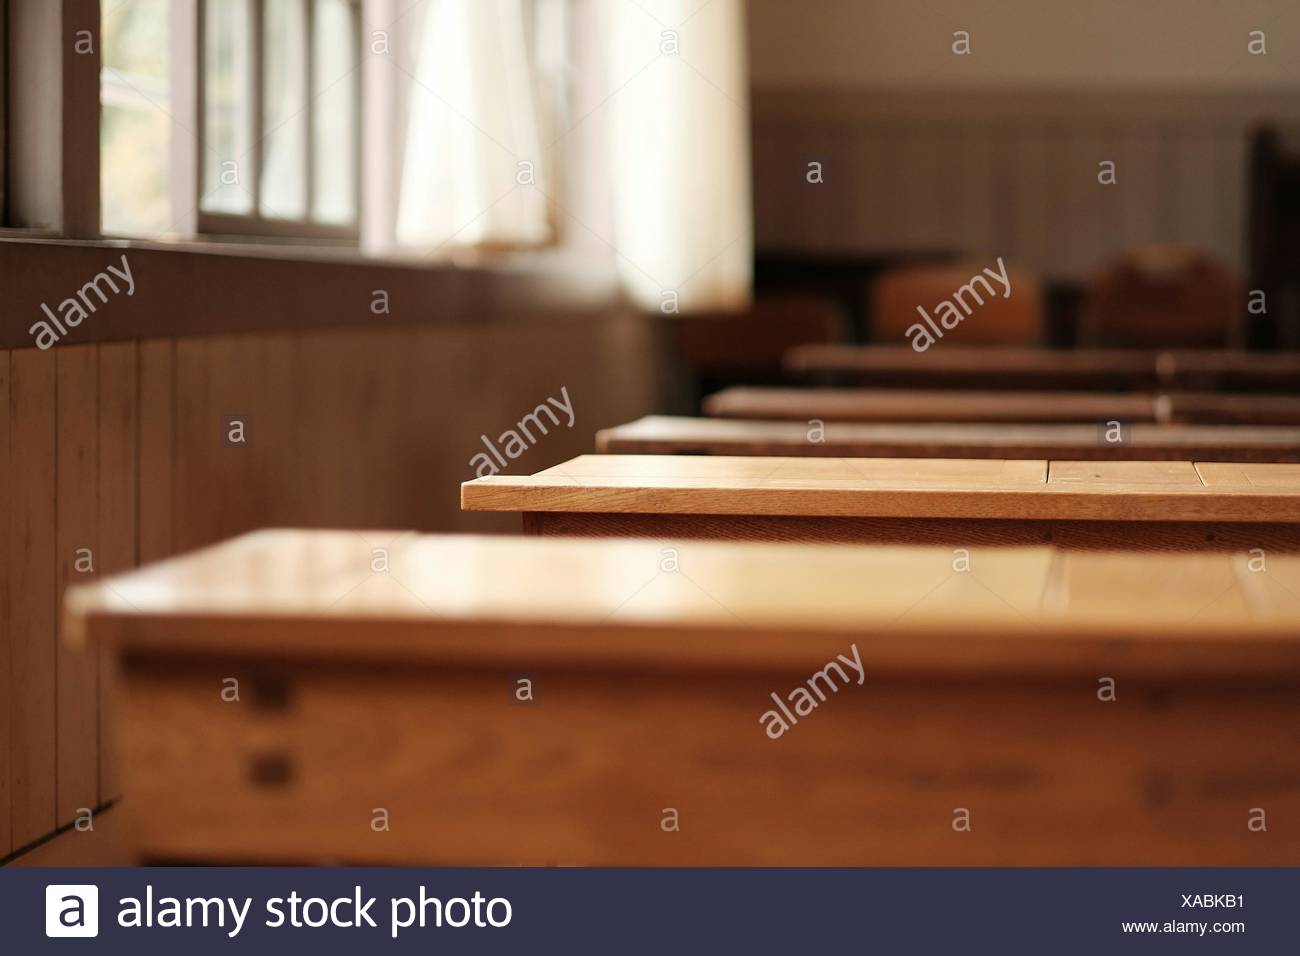 Wooden Benches In School Stock Photo Alamy